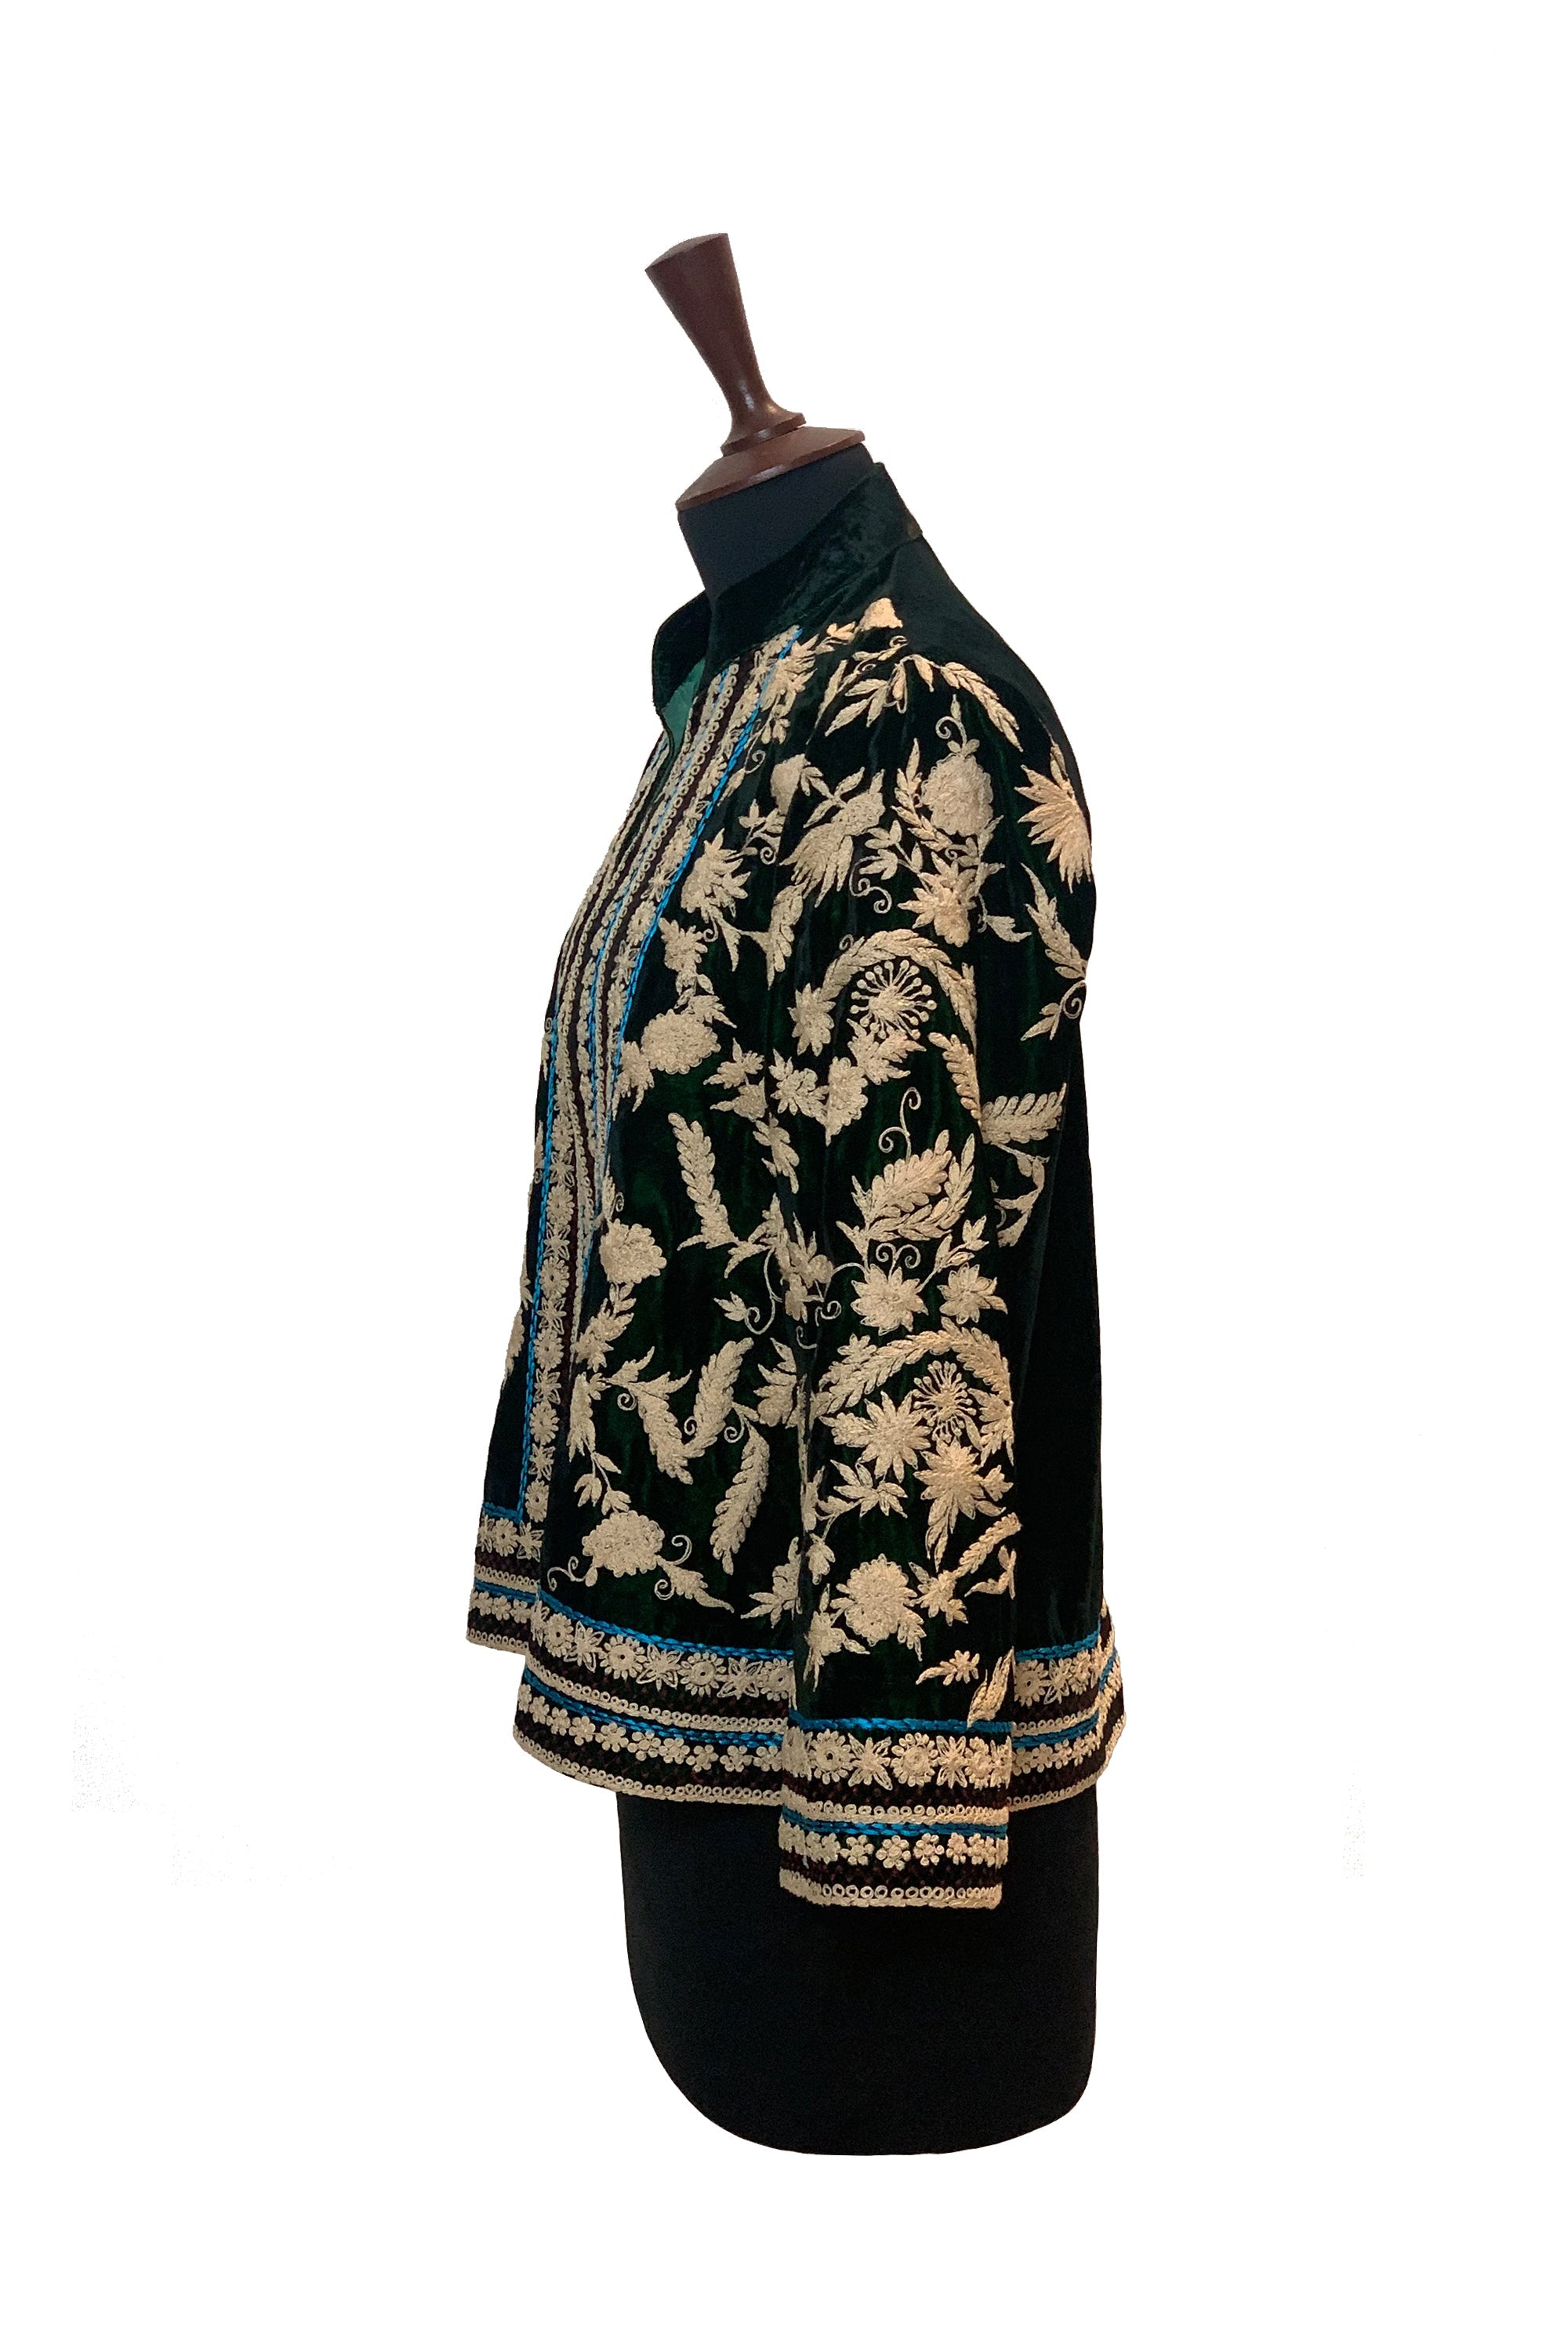 Royal Emerald Green Hand Embroidered Velvet Jacket. Perfect for Qawalis and Musical Evenings or Winter Dinners.